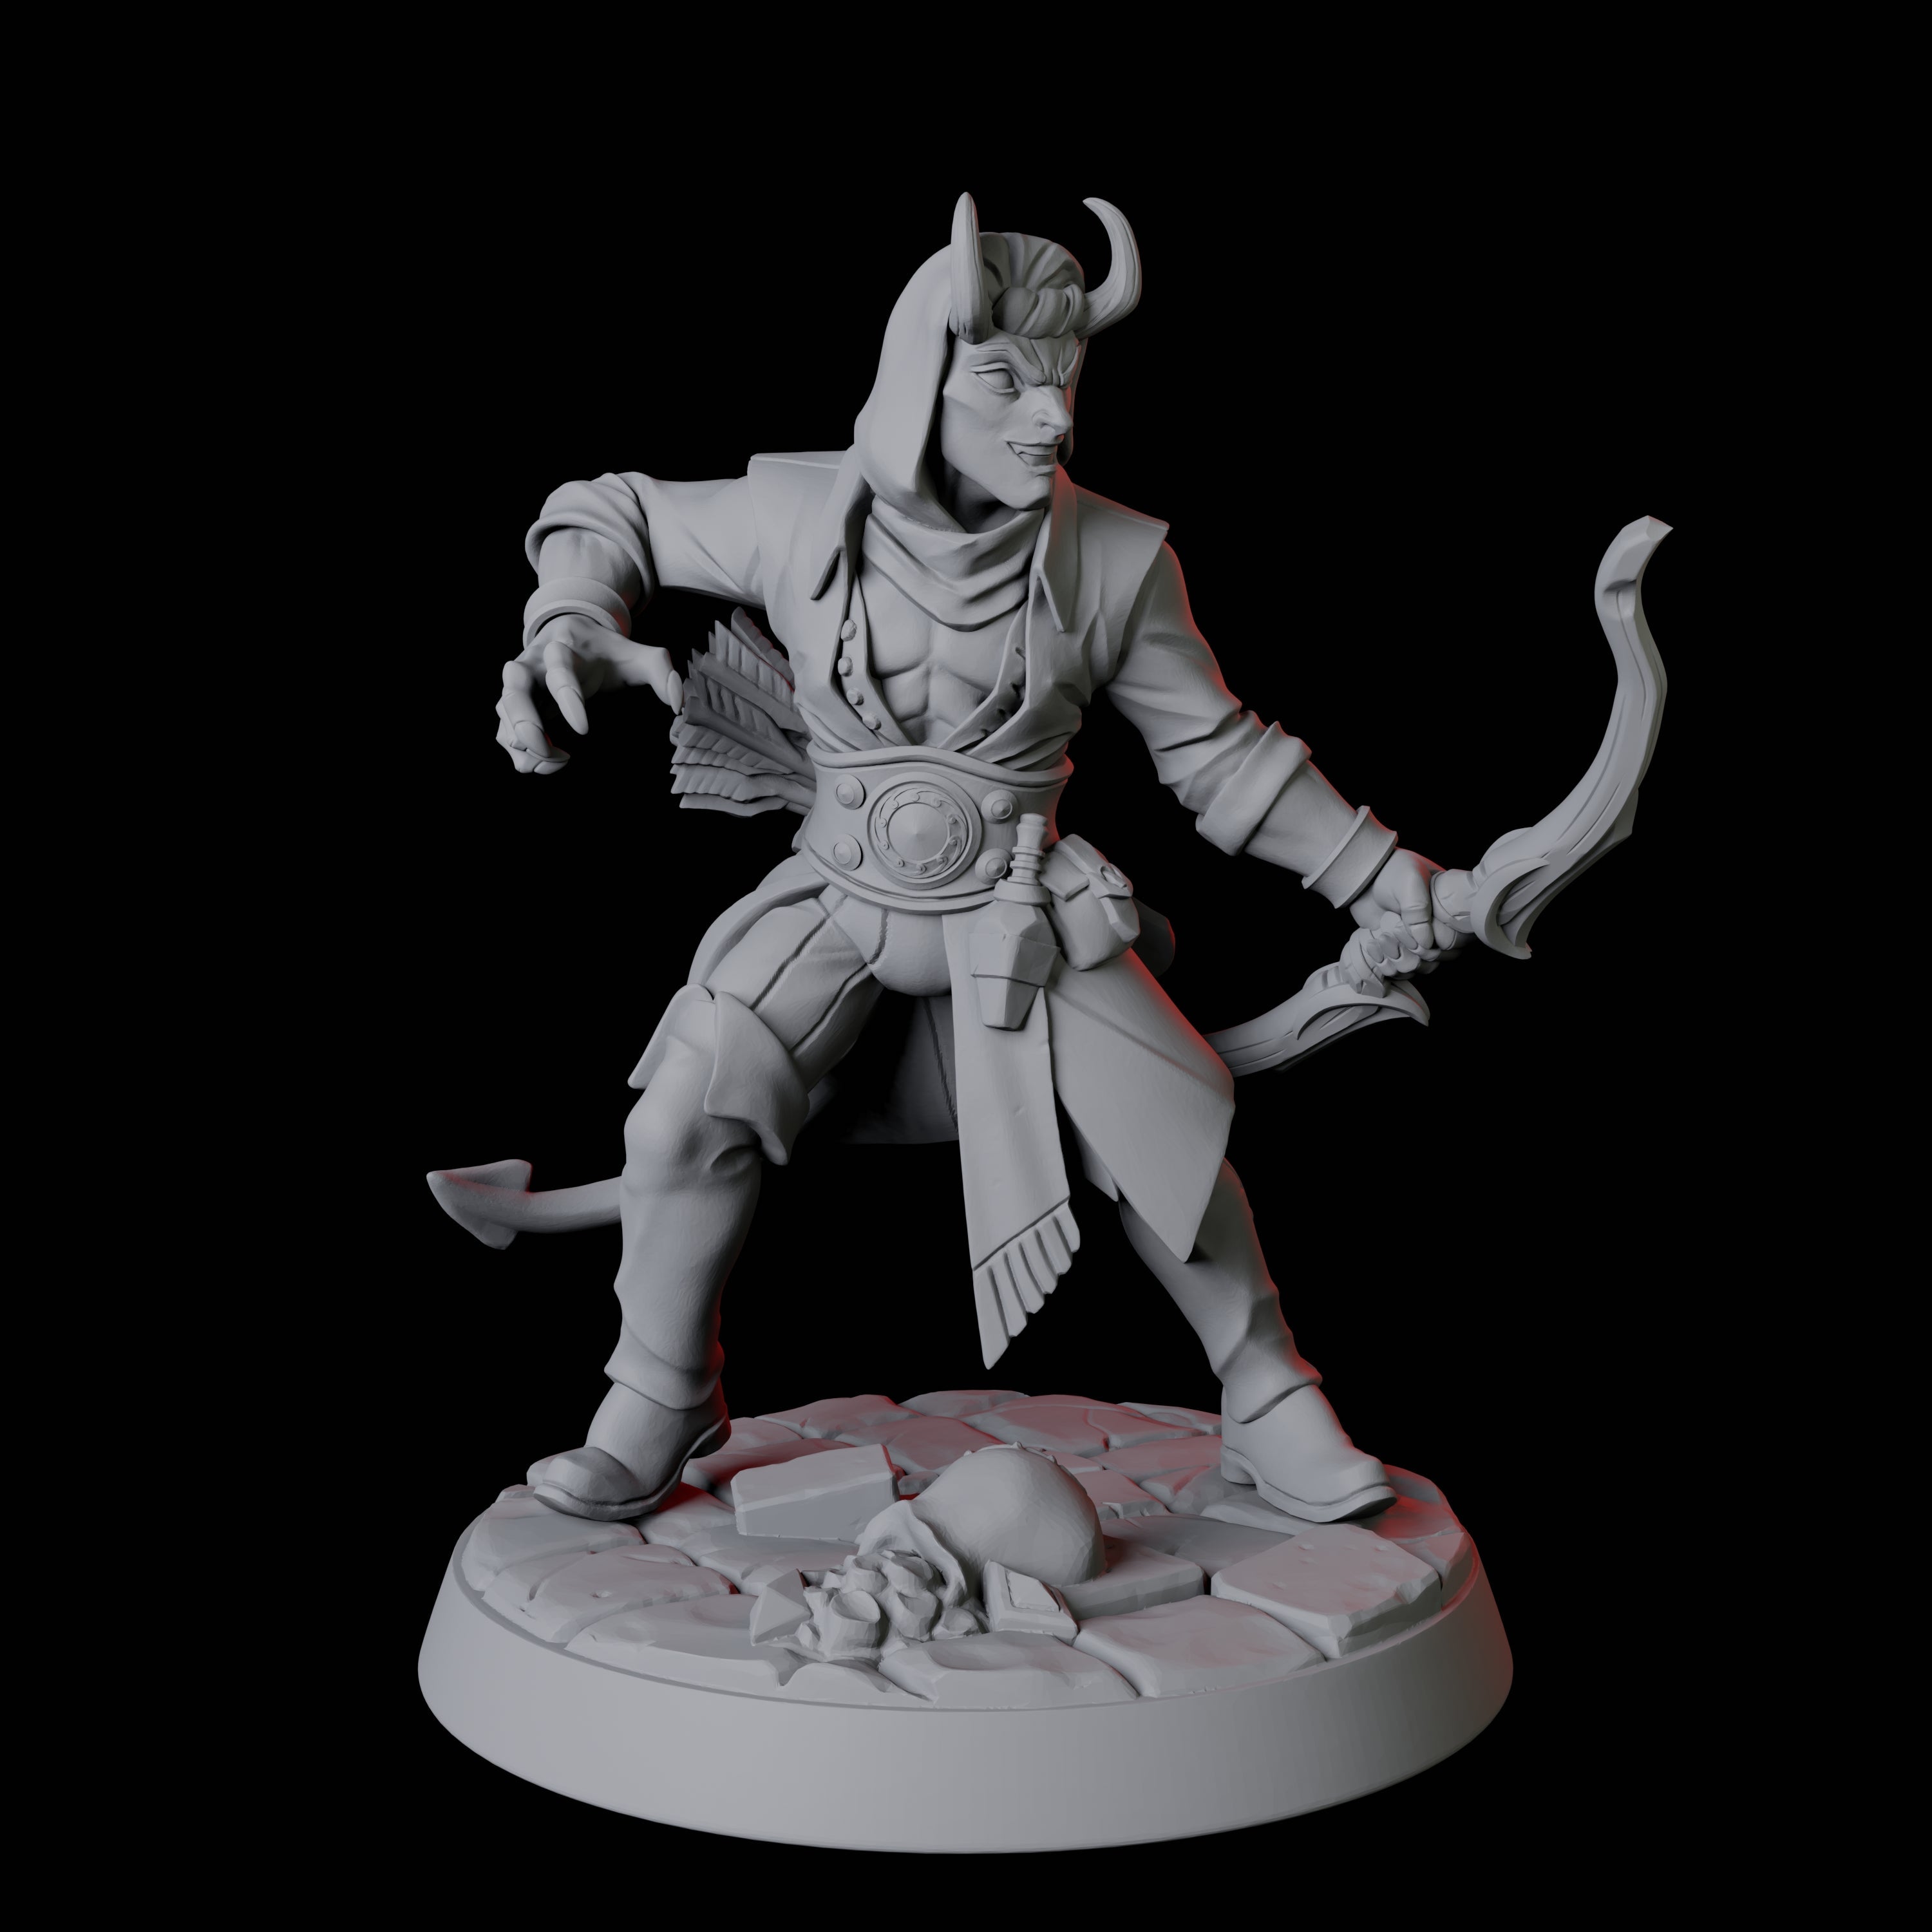 Tiefling Fighter B Miniature for Dungeons and Dragons, Pathfinder or other TTRPGs